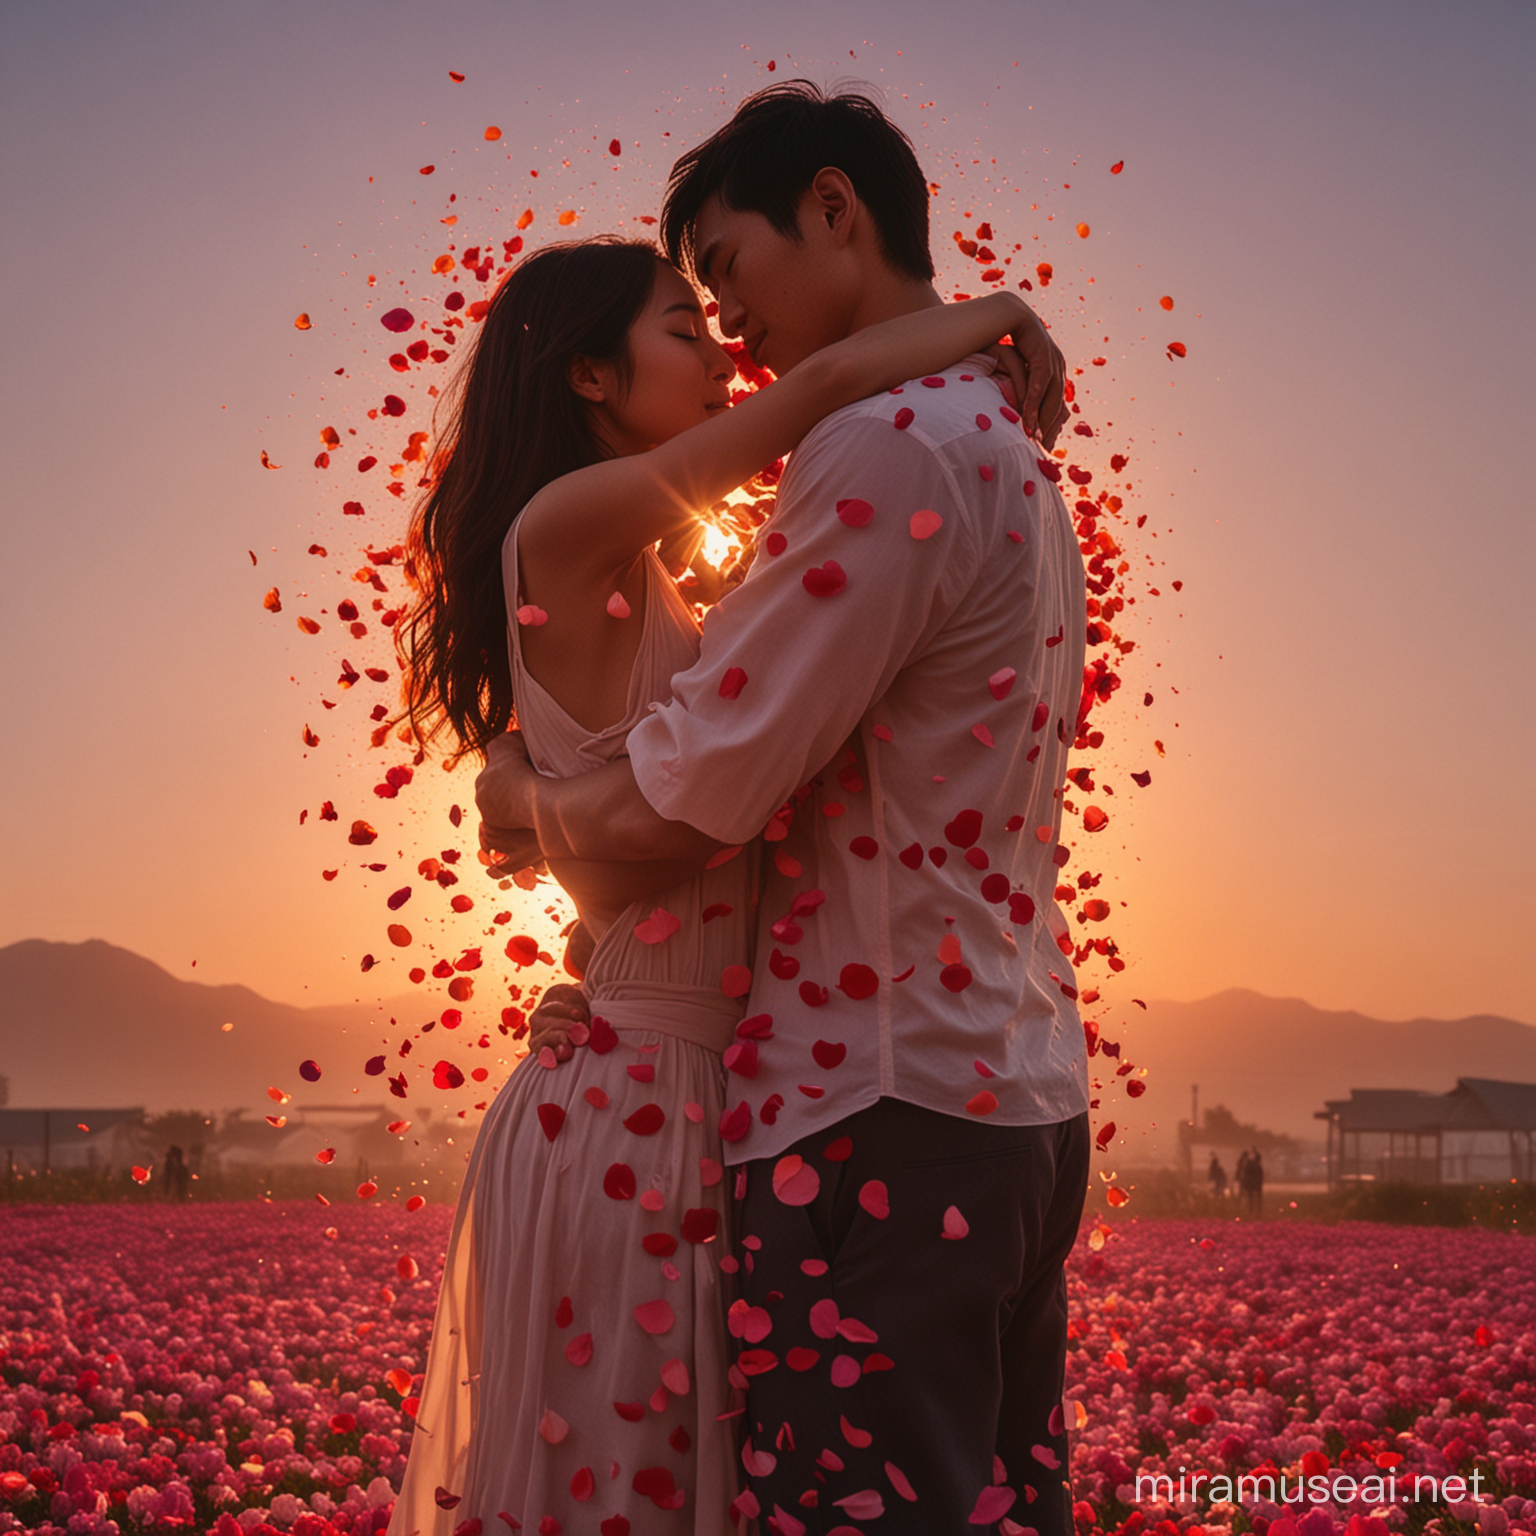 An Asian man totally constructed of only flower petals hugging an Asian girl. He has his back facing the camera. The couple is standing in front of a backlid sunset. The petals slowly lifting off his body, deconstructing into “Hollow man”. Looking like fading away through time. 